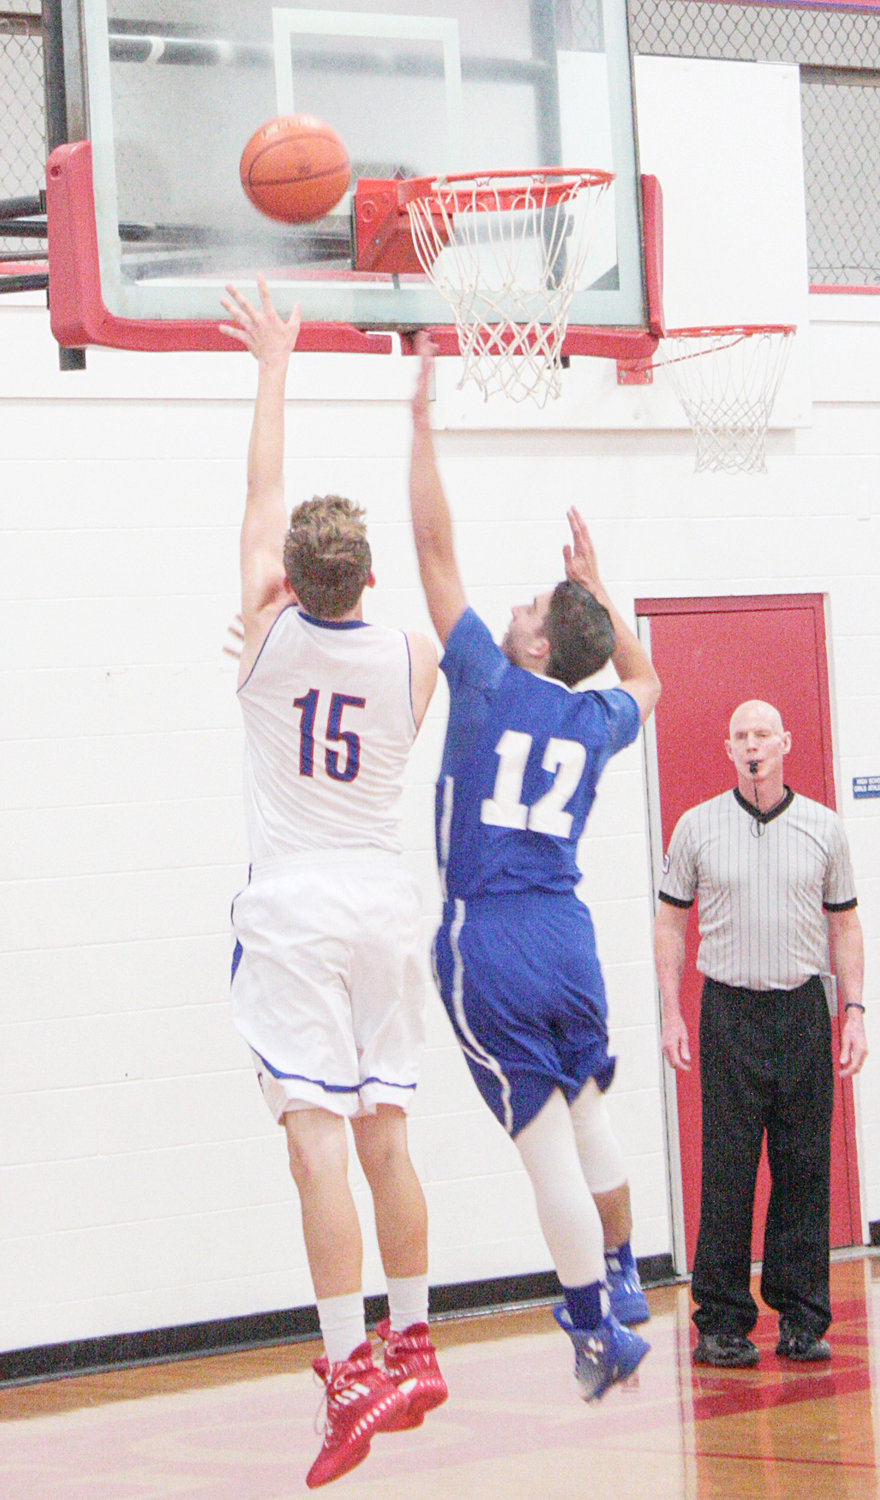 Dawson Kirk (15) goes up for one of his seven baskets Friday night in Alba-Golden’s season opener against Hawkins. The Hawks’ Mark Pope (12) contested Kirk hard at the bucket, but could not make the block and stop the score.